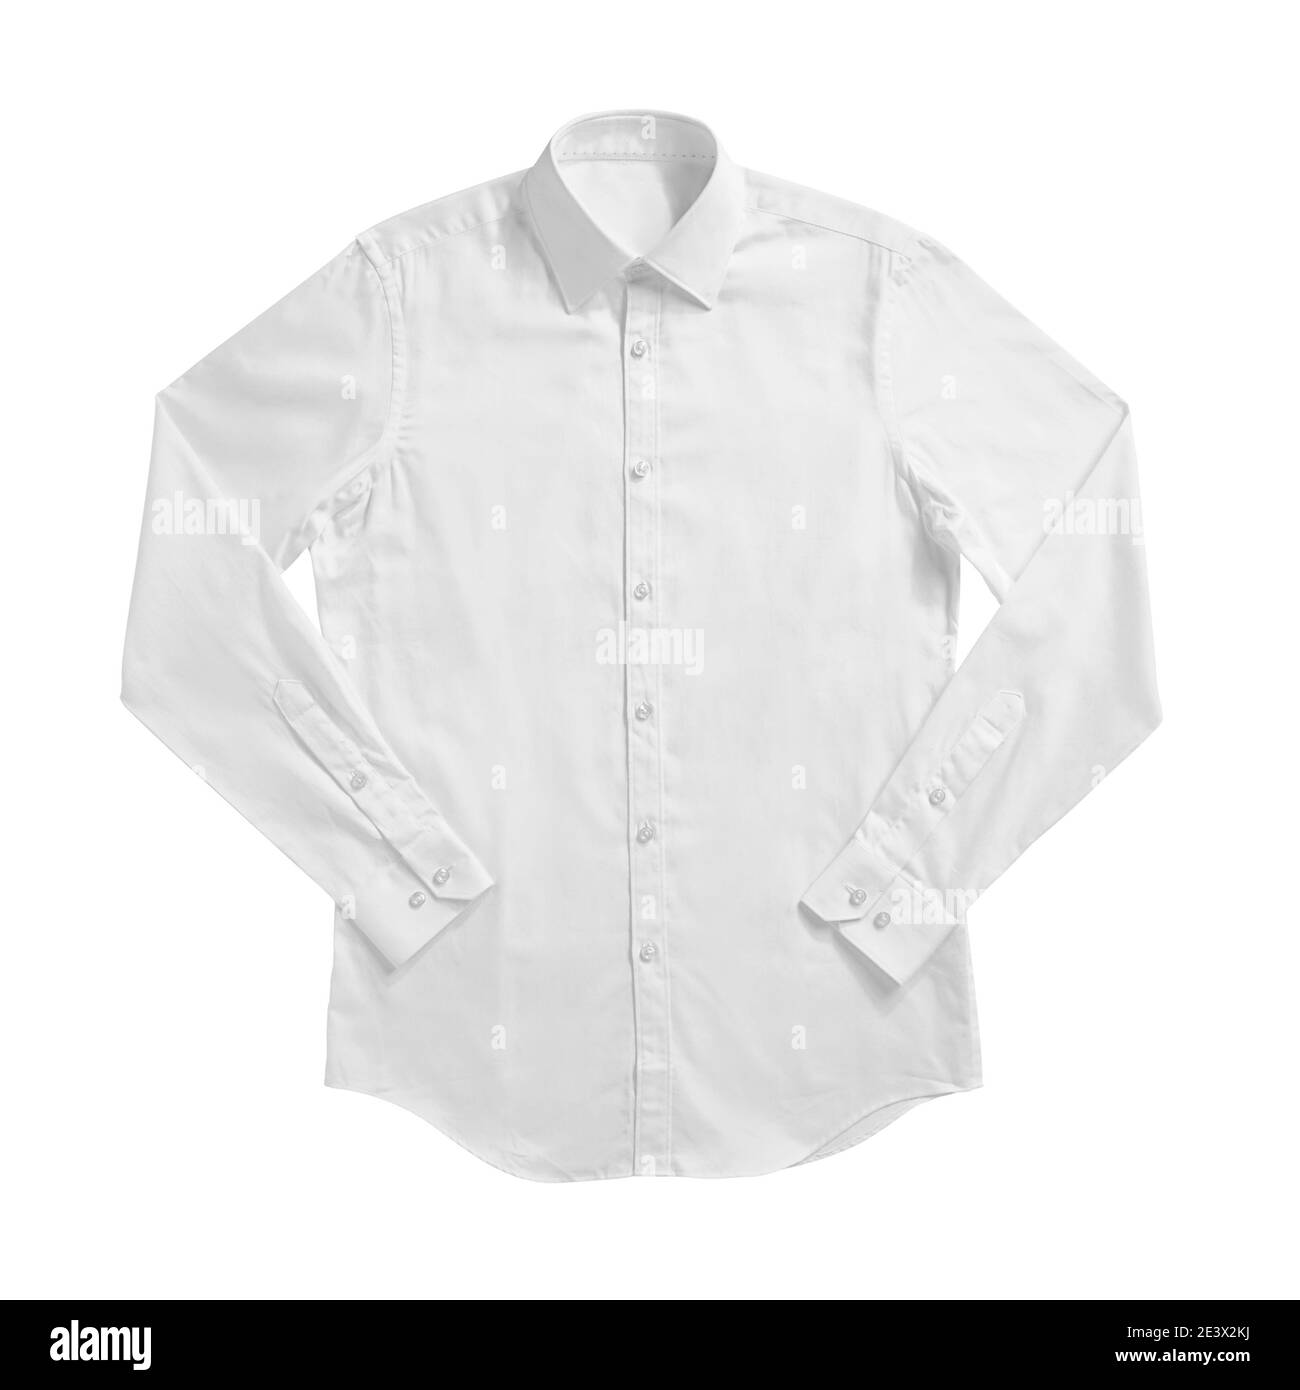 Formal shirt Black and White Stock Photos & Images - Alamy